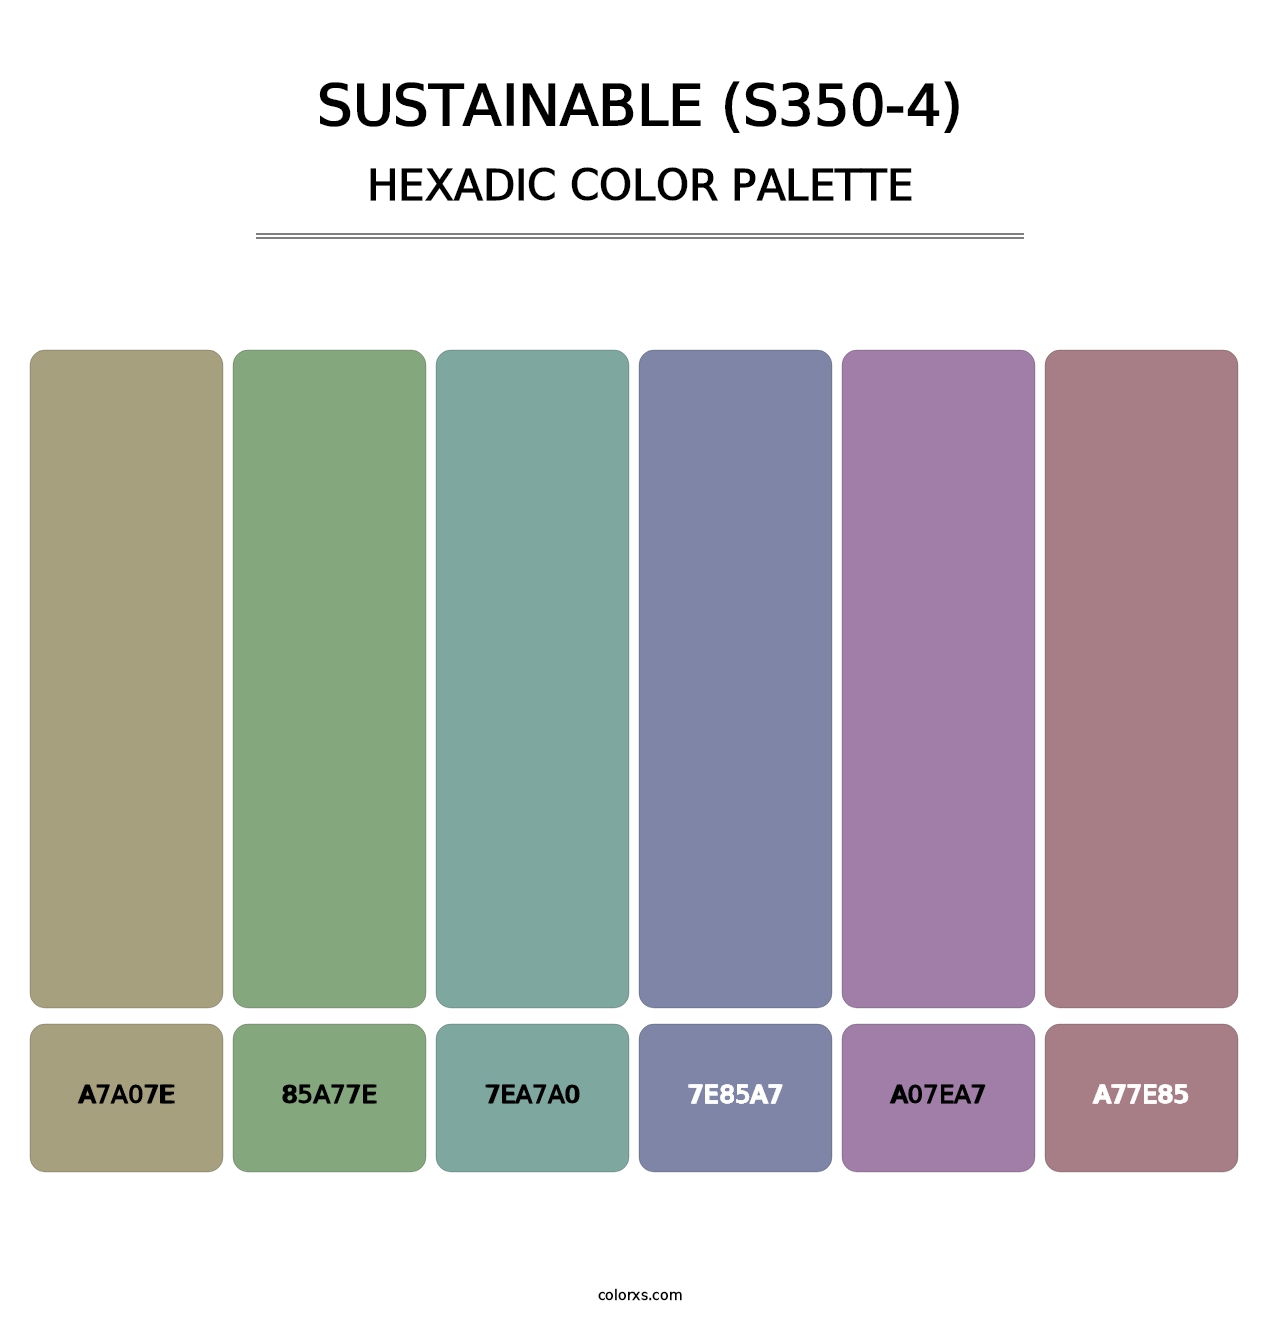 Sustainable (S350-4) - Hexadic Color Palette